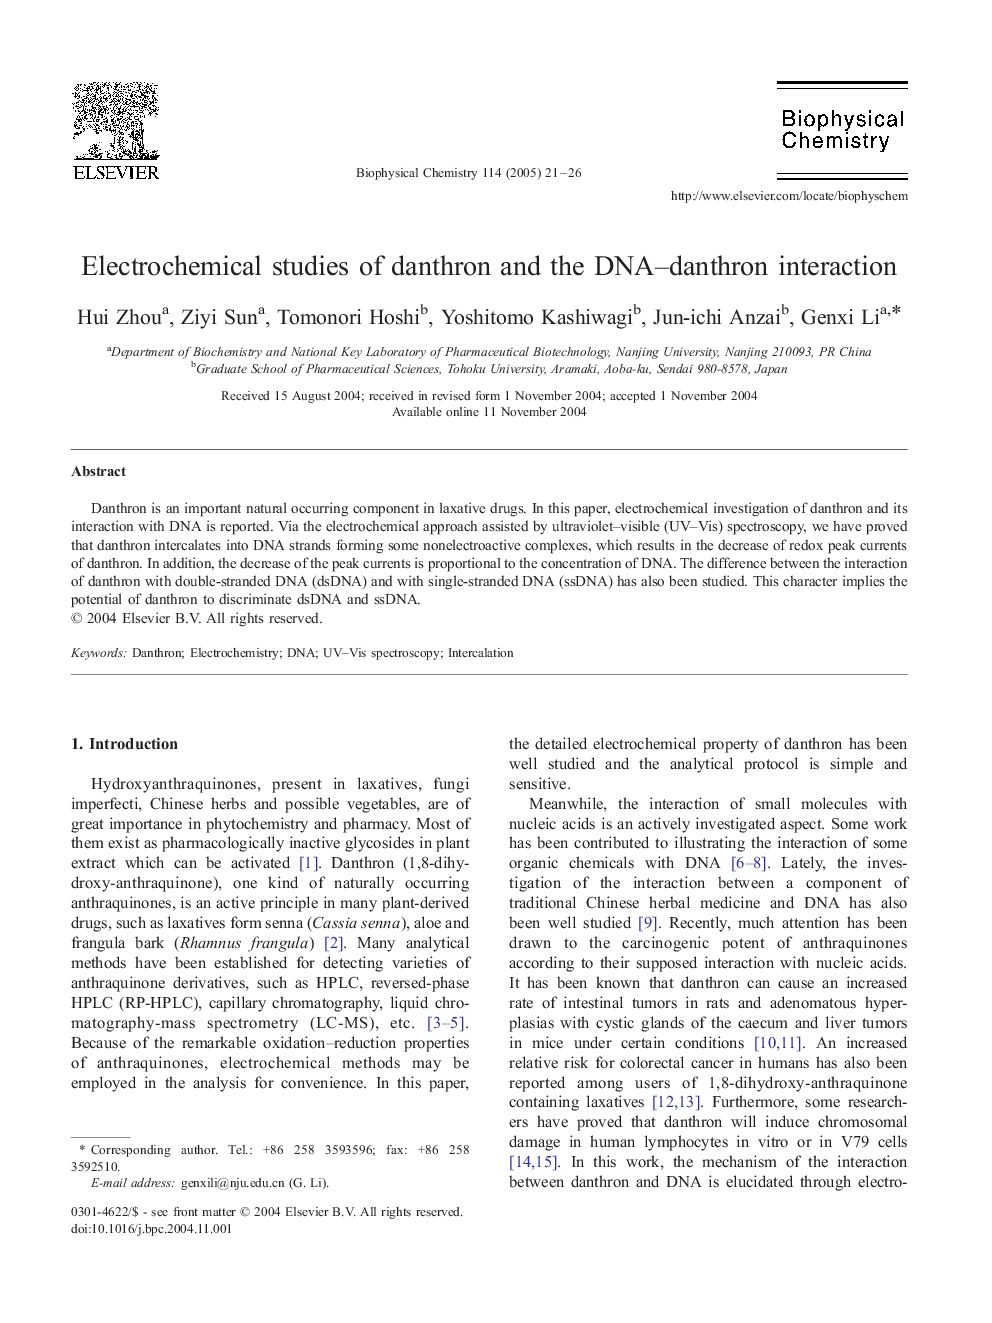 Electrochemical studies of danthron and the DNA-danthron interaction